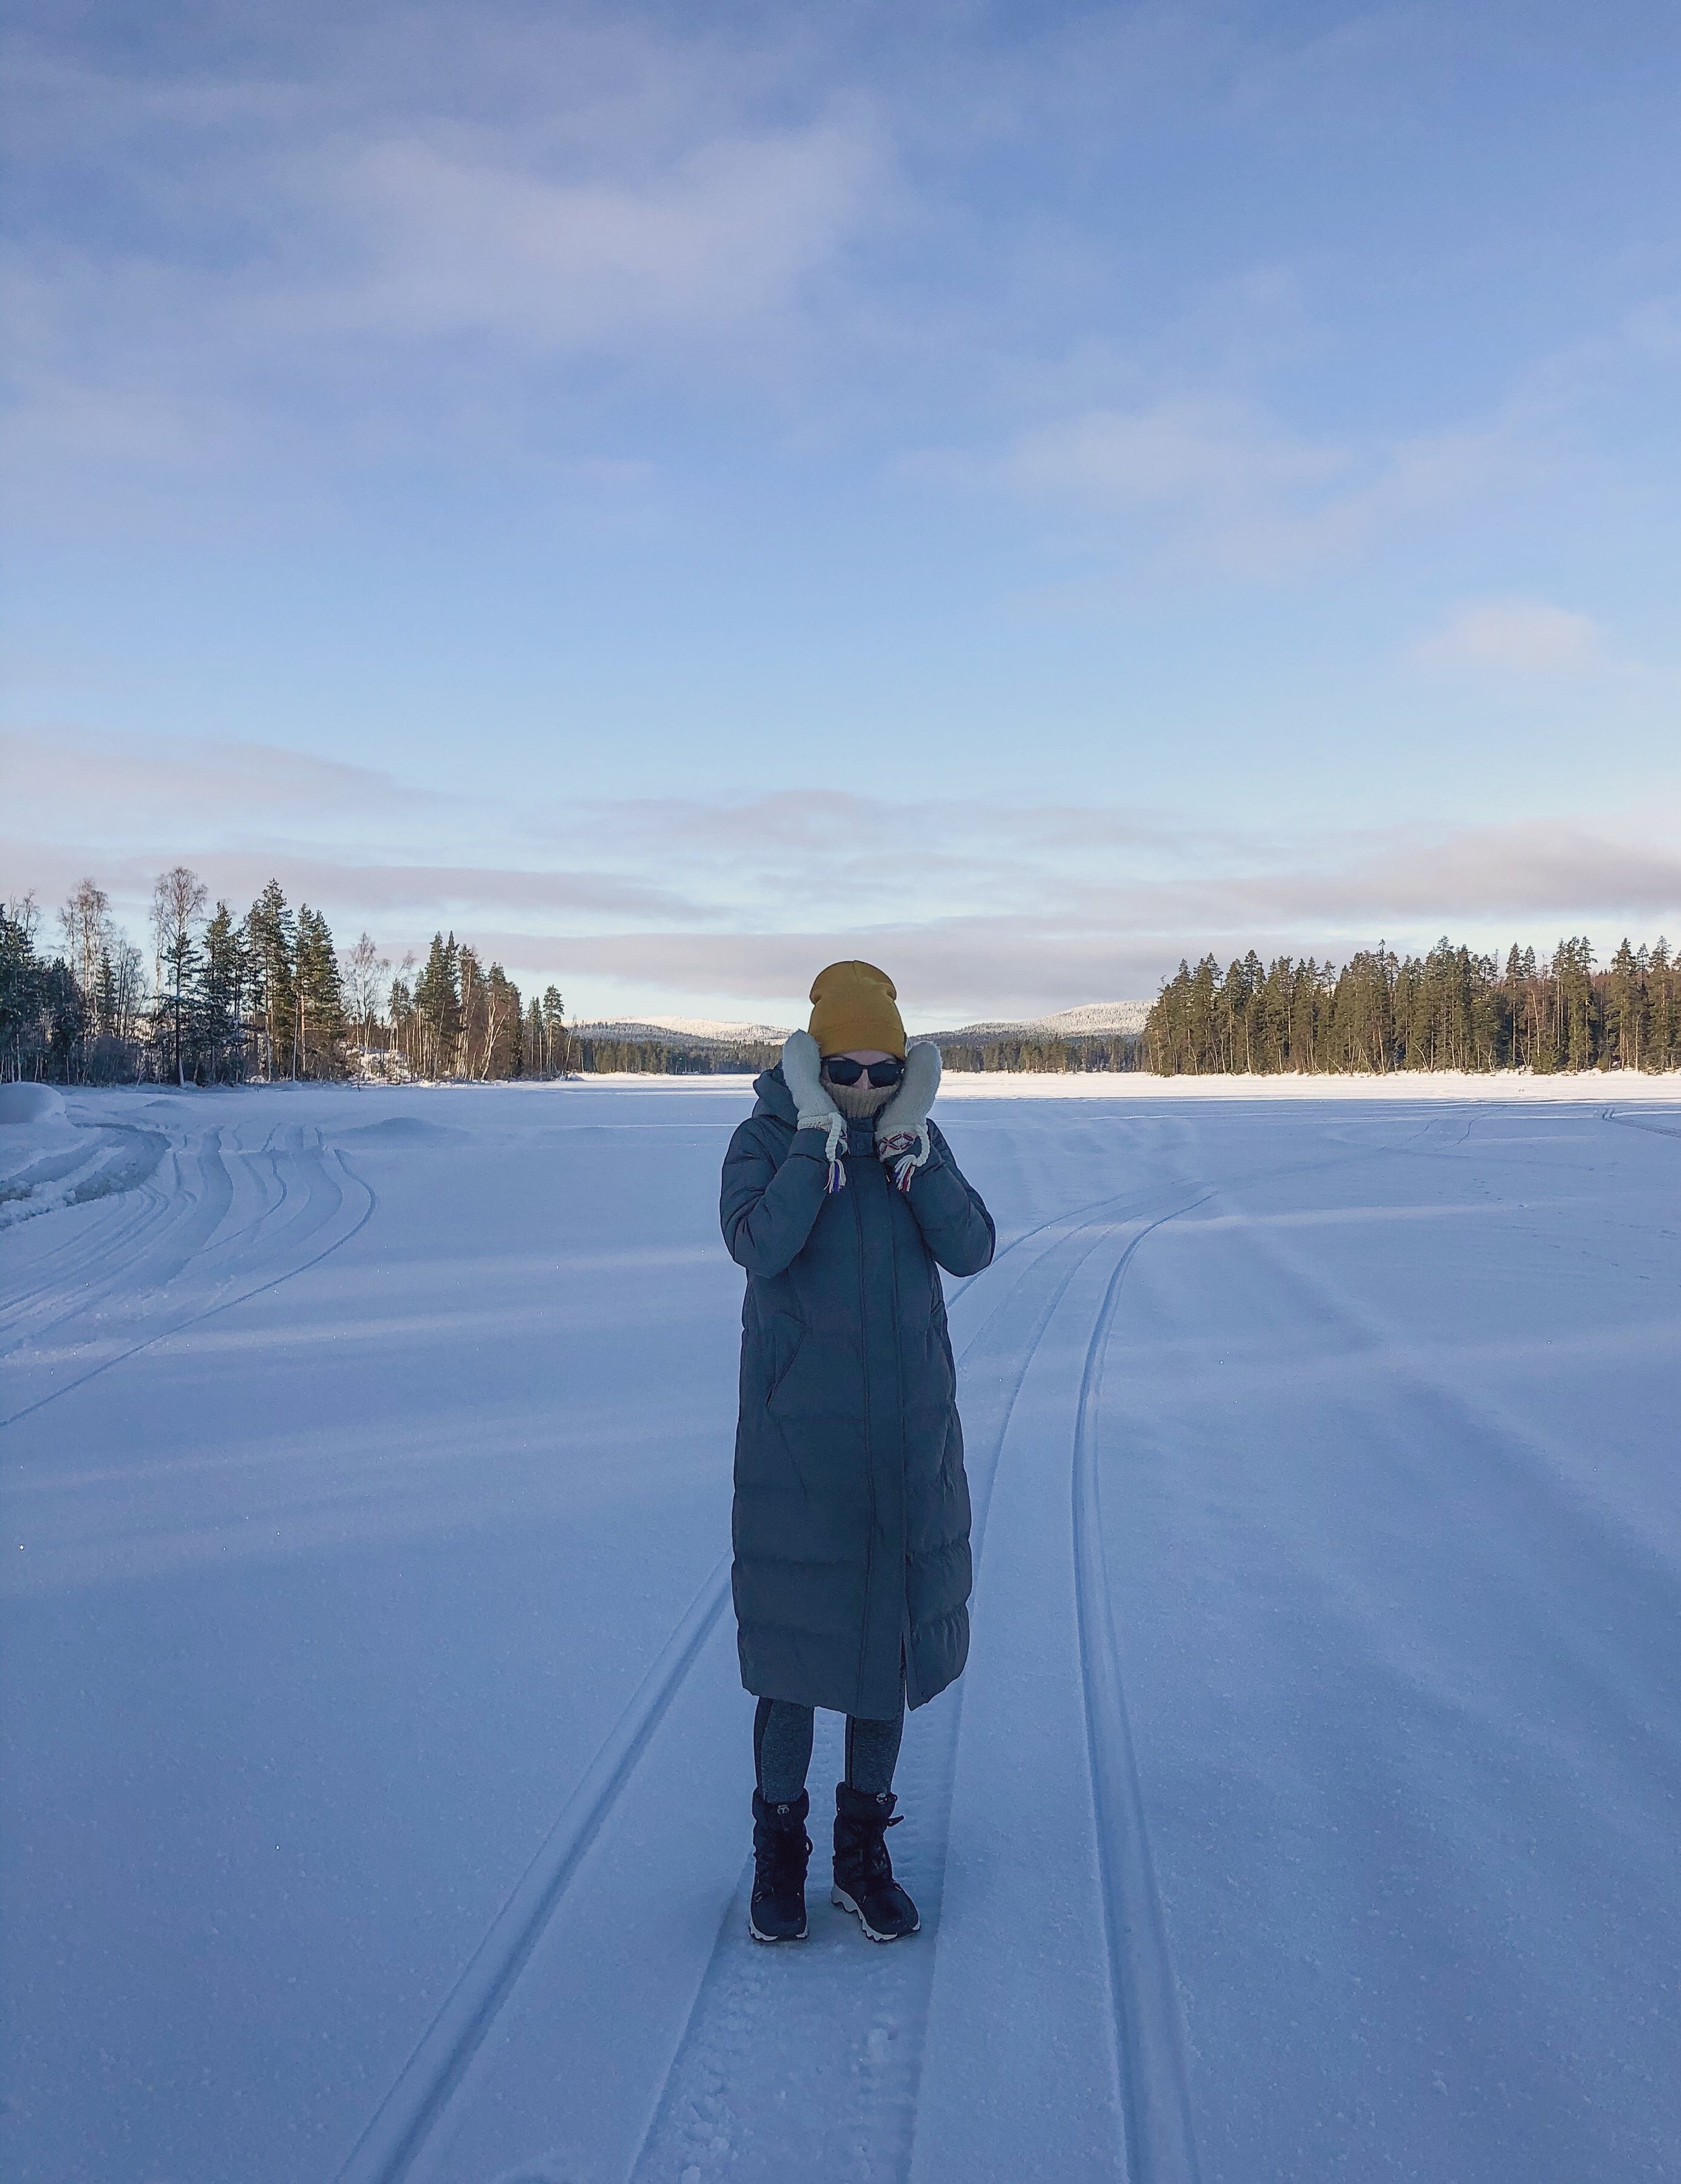 Nadia standing on our local frozen lake in February 2021. Photo: Nadia Henderson